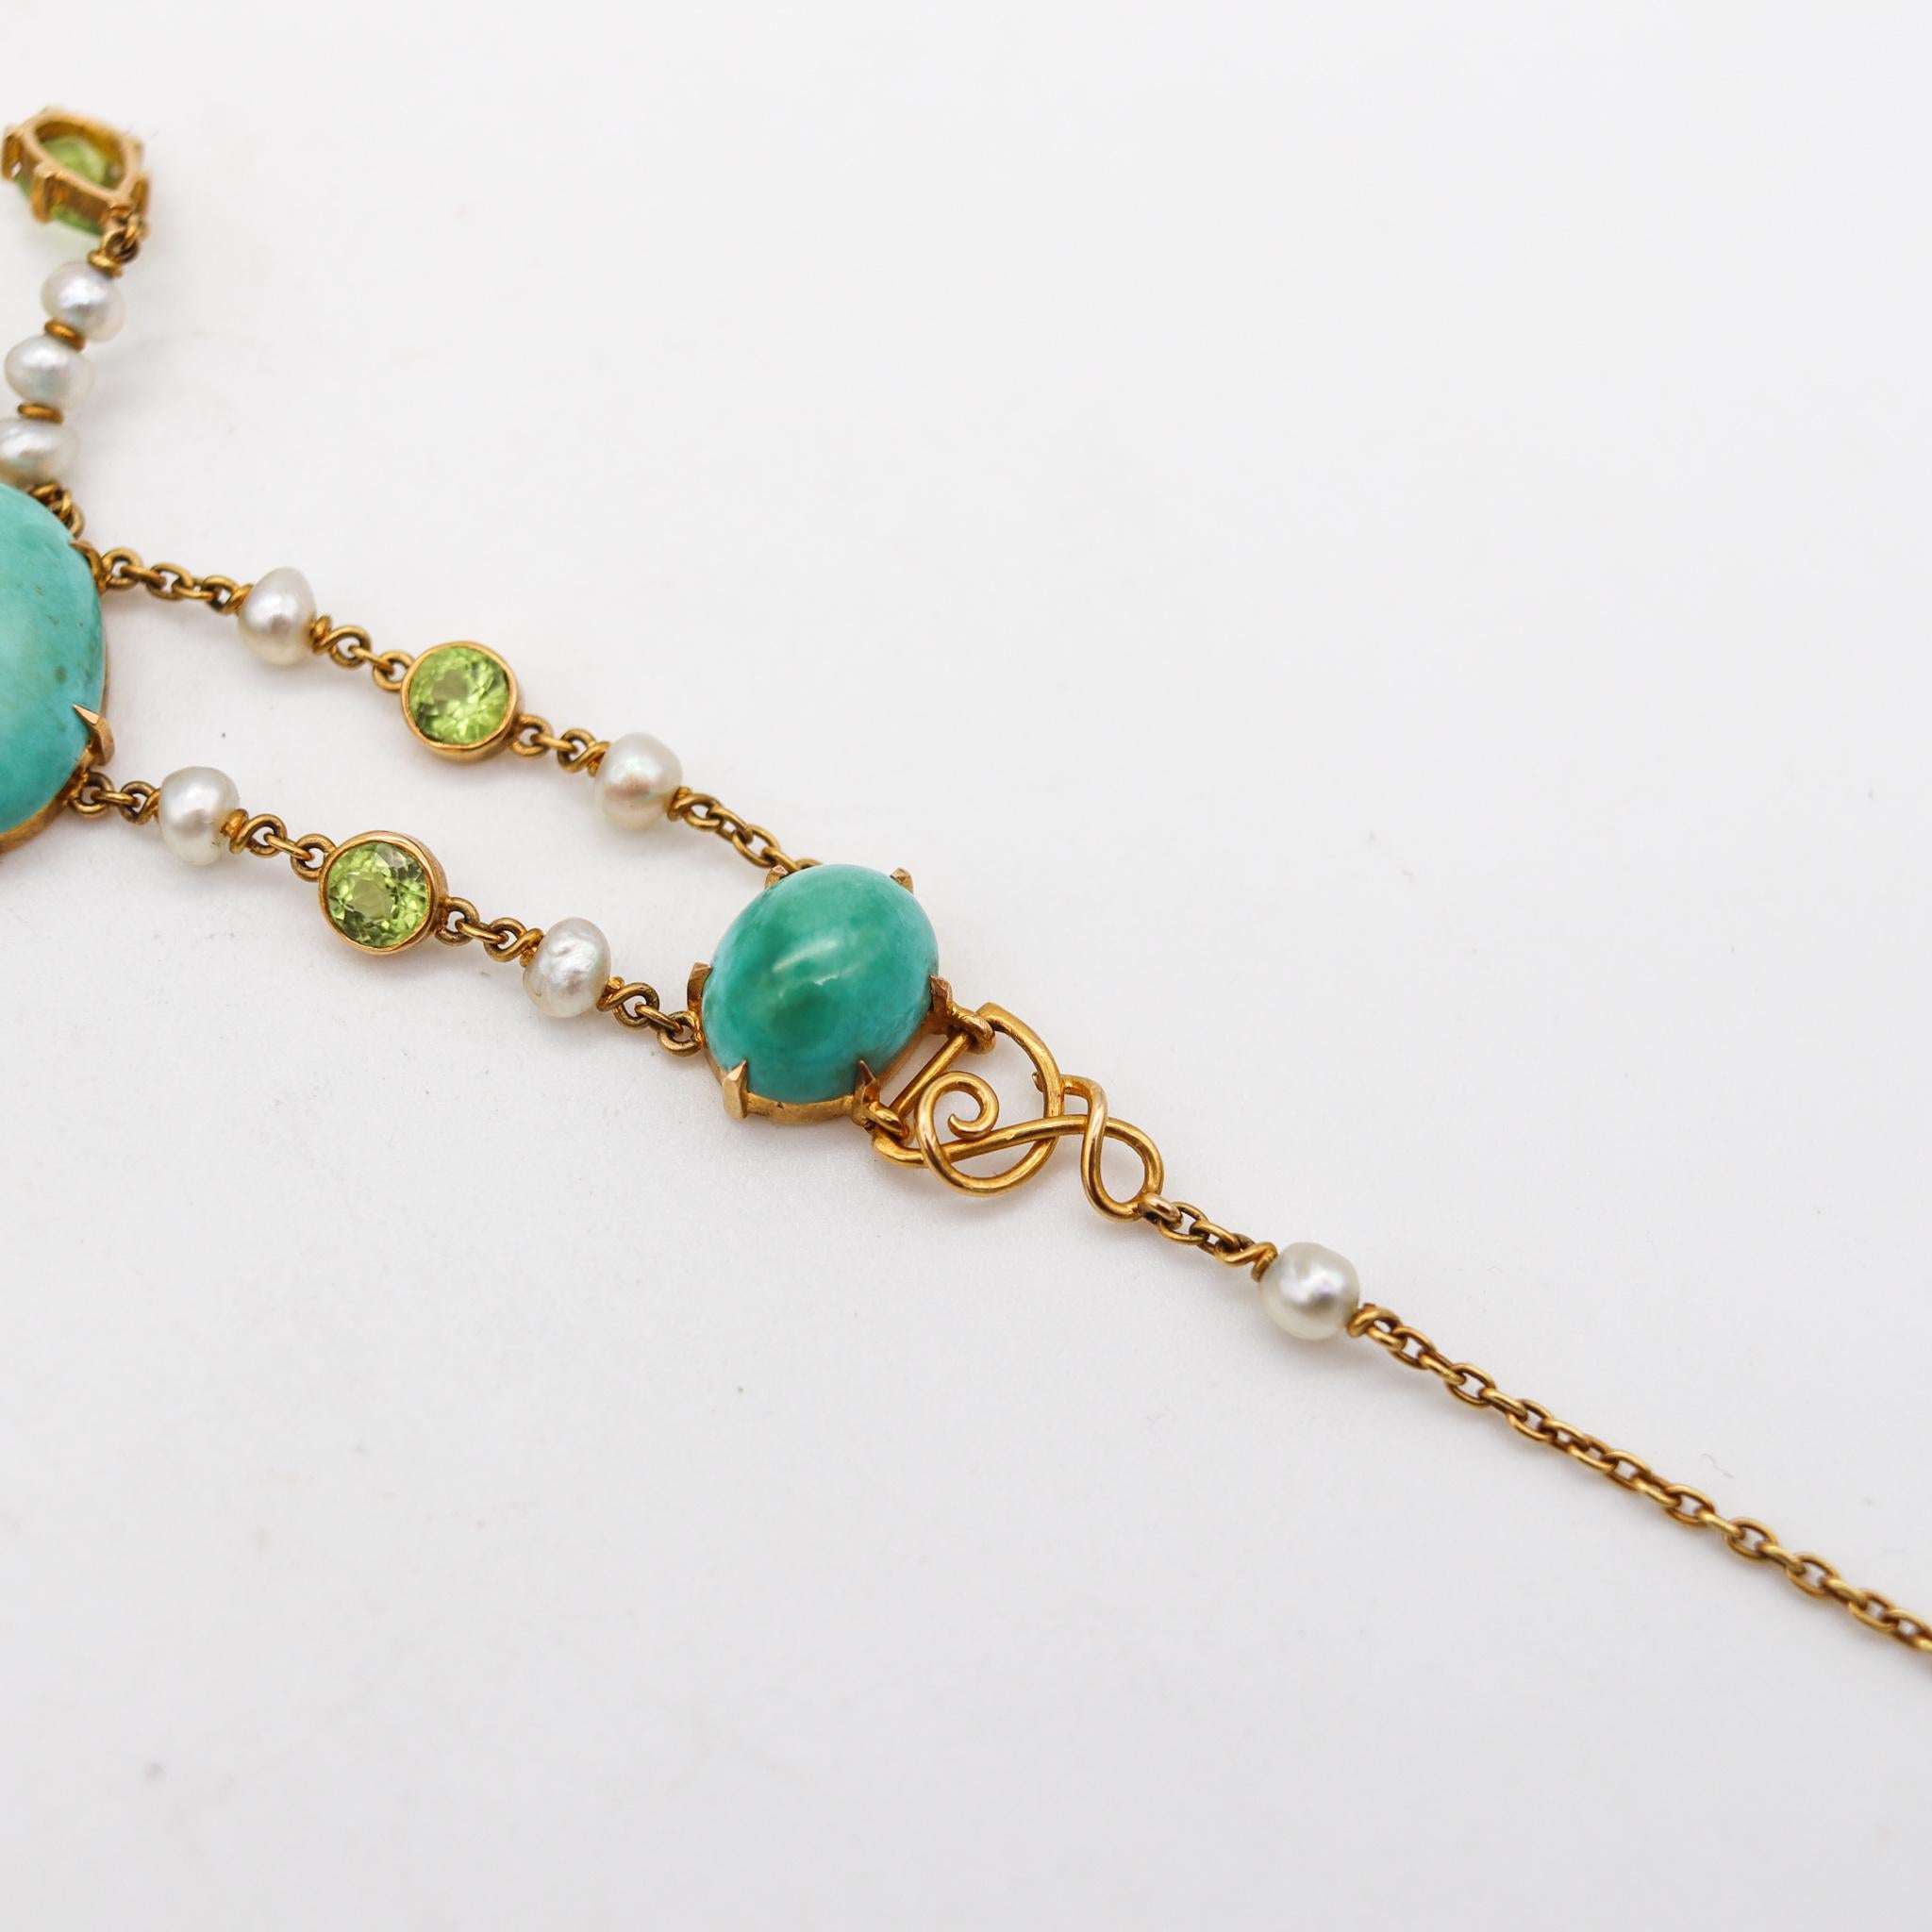 Women's Victorian 1890 Necklace in 18kt Gold with 51.04cts Peridots Turquoises & Pearls For Sale